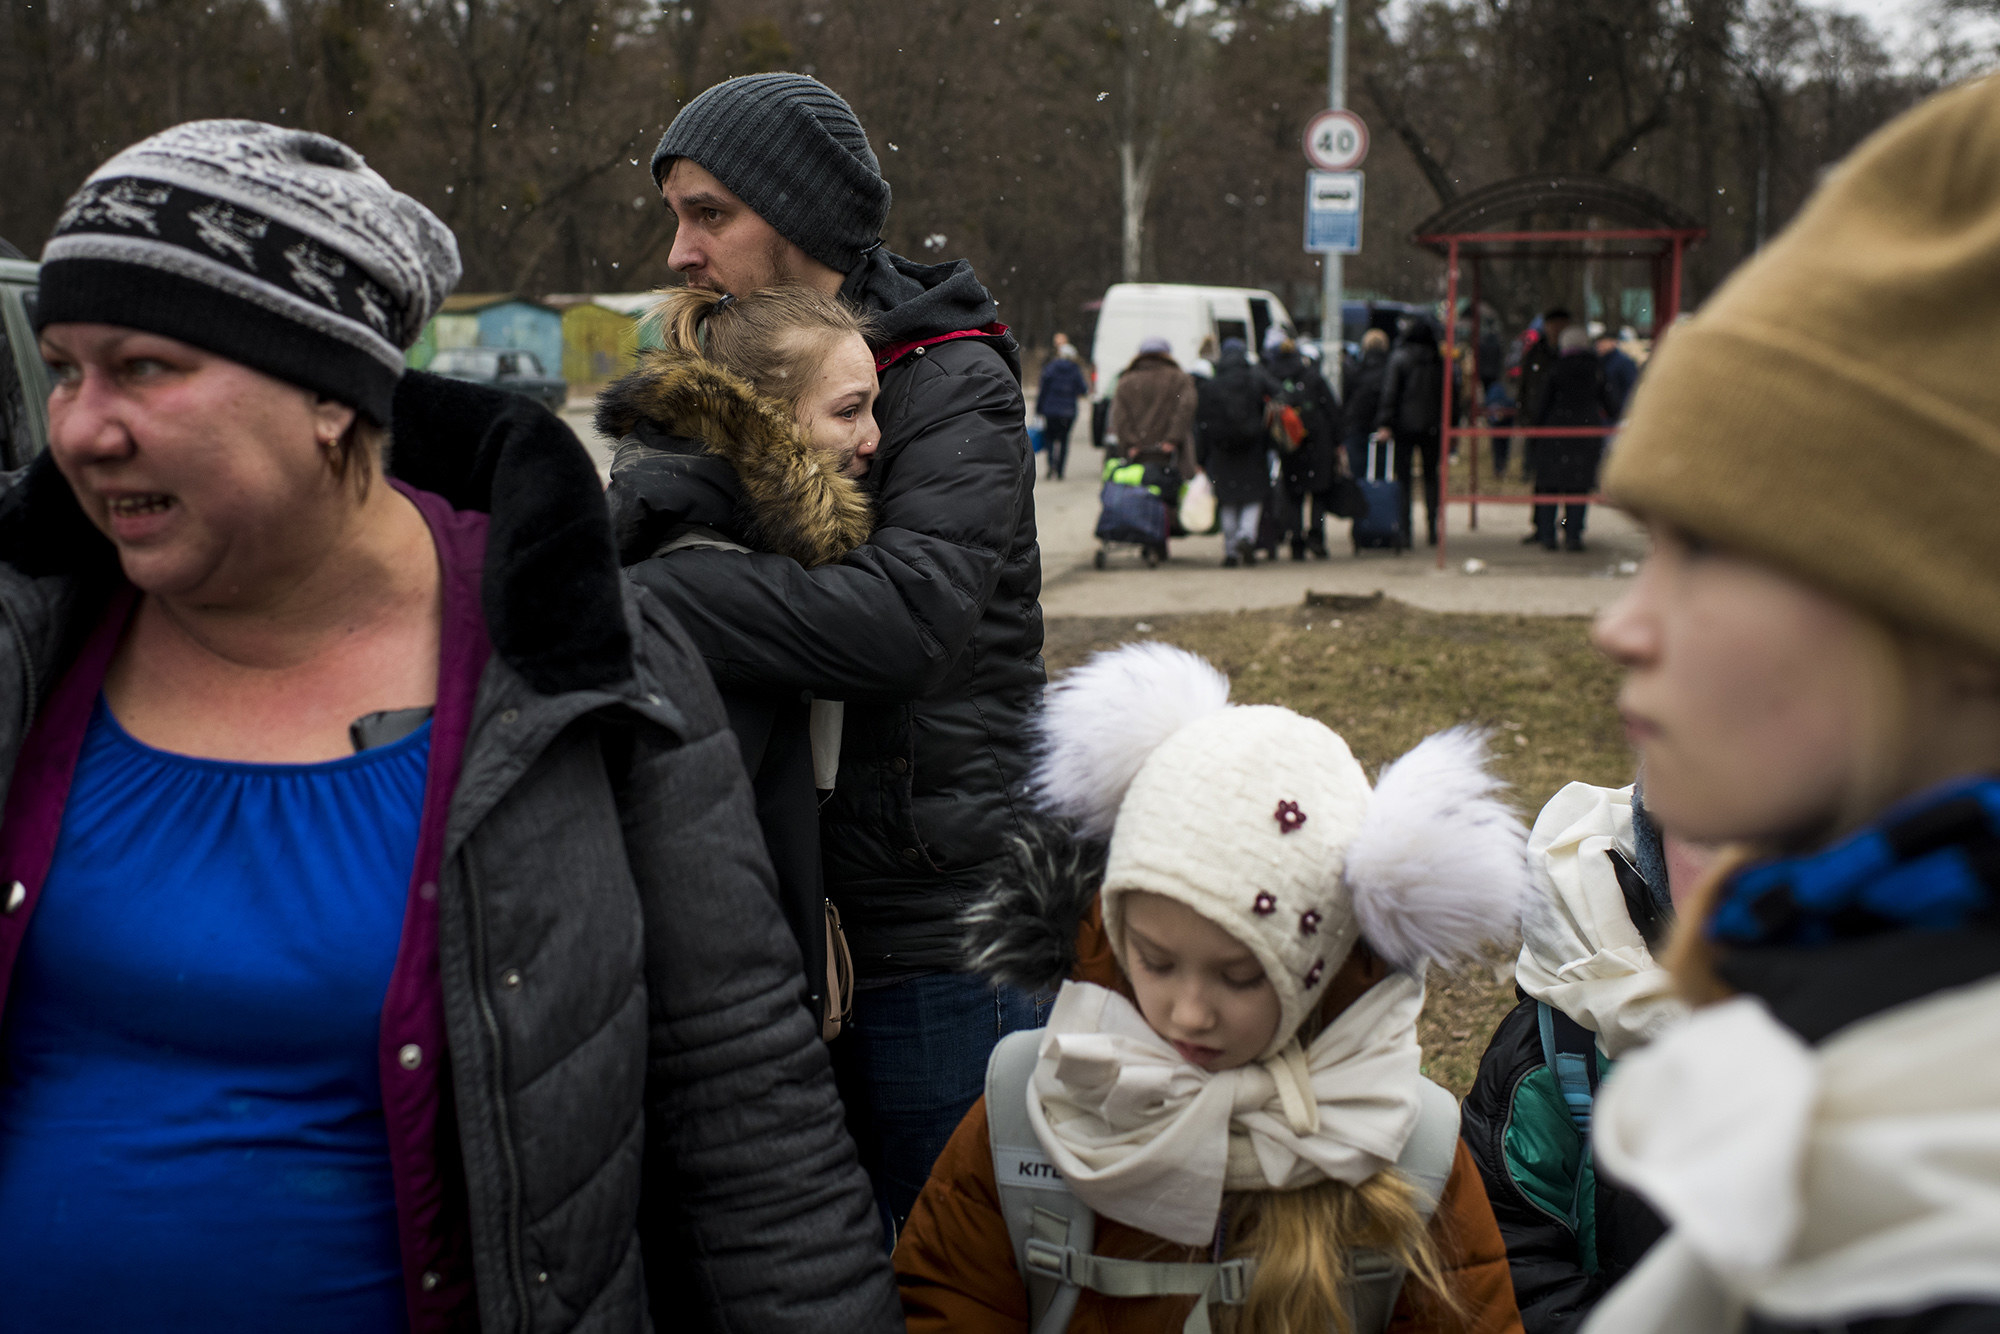 Women, a man, and children in heavy outerwear stand together